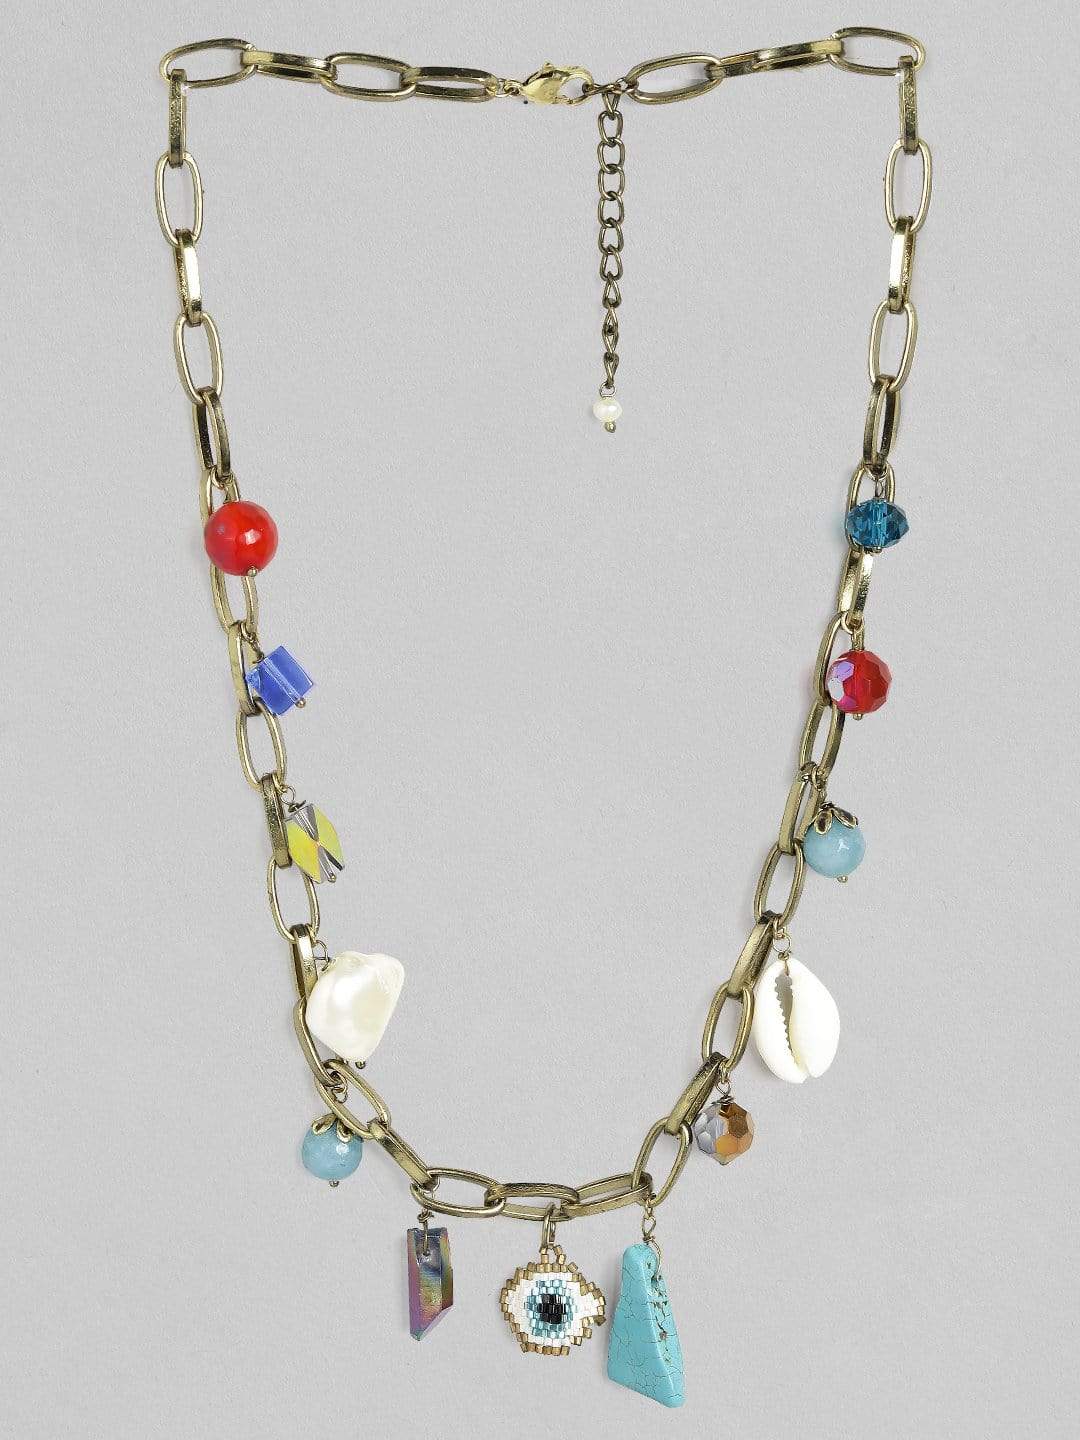 Antique Gold Plated Multicolor Beads Contemporary Bracelet Chain & Necklaces